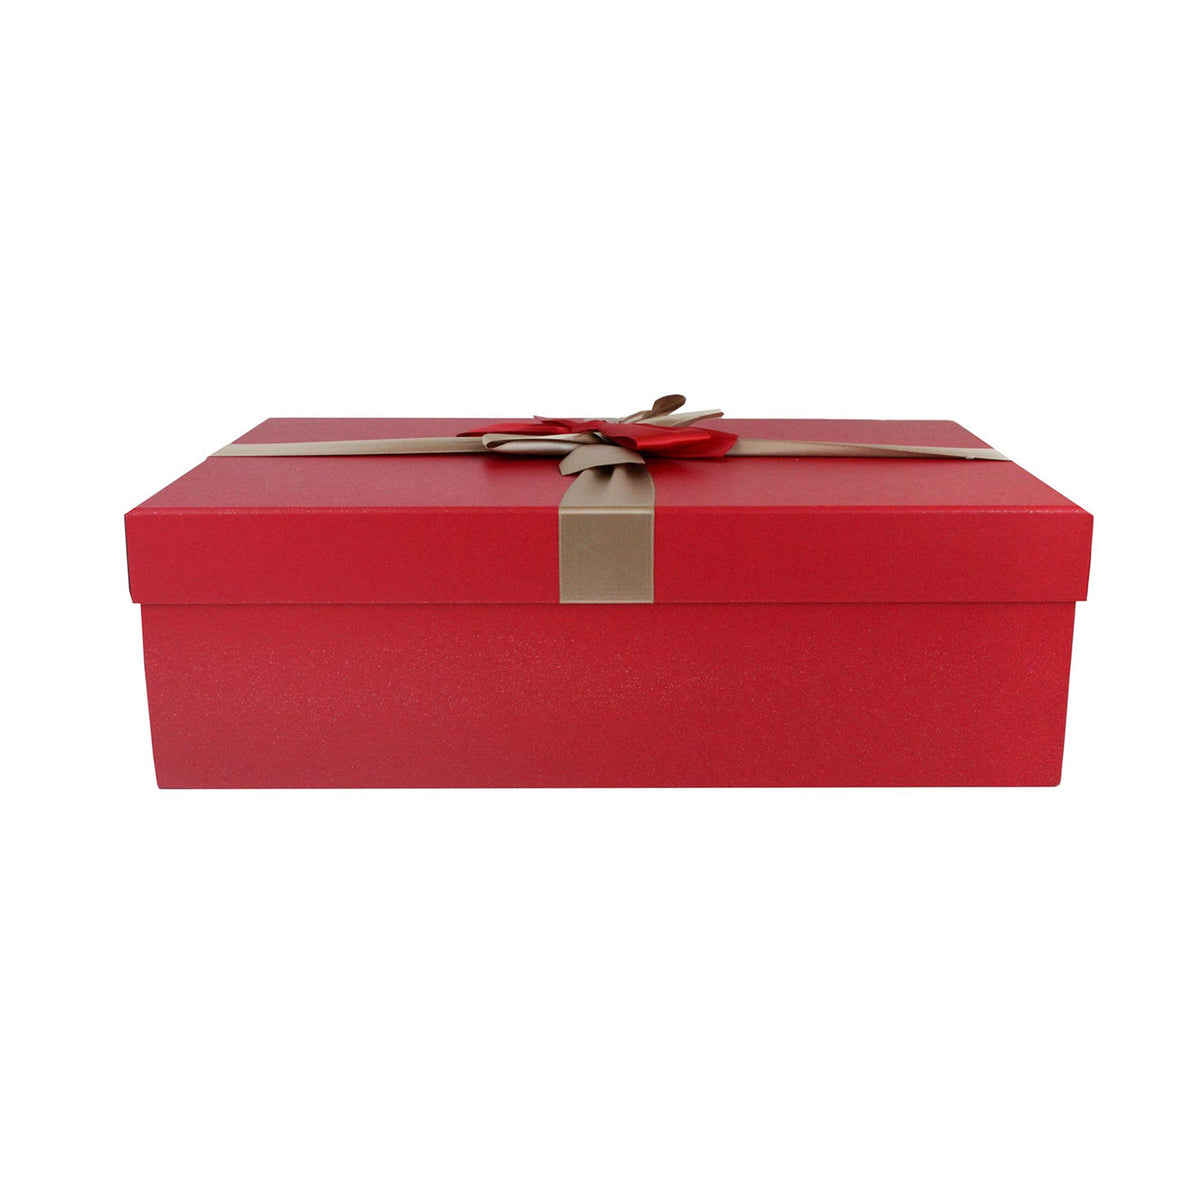 Single Red Gift Box With Cream Satin Ribbon (Sizes Available)